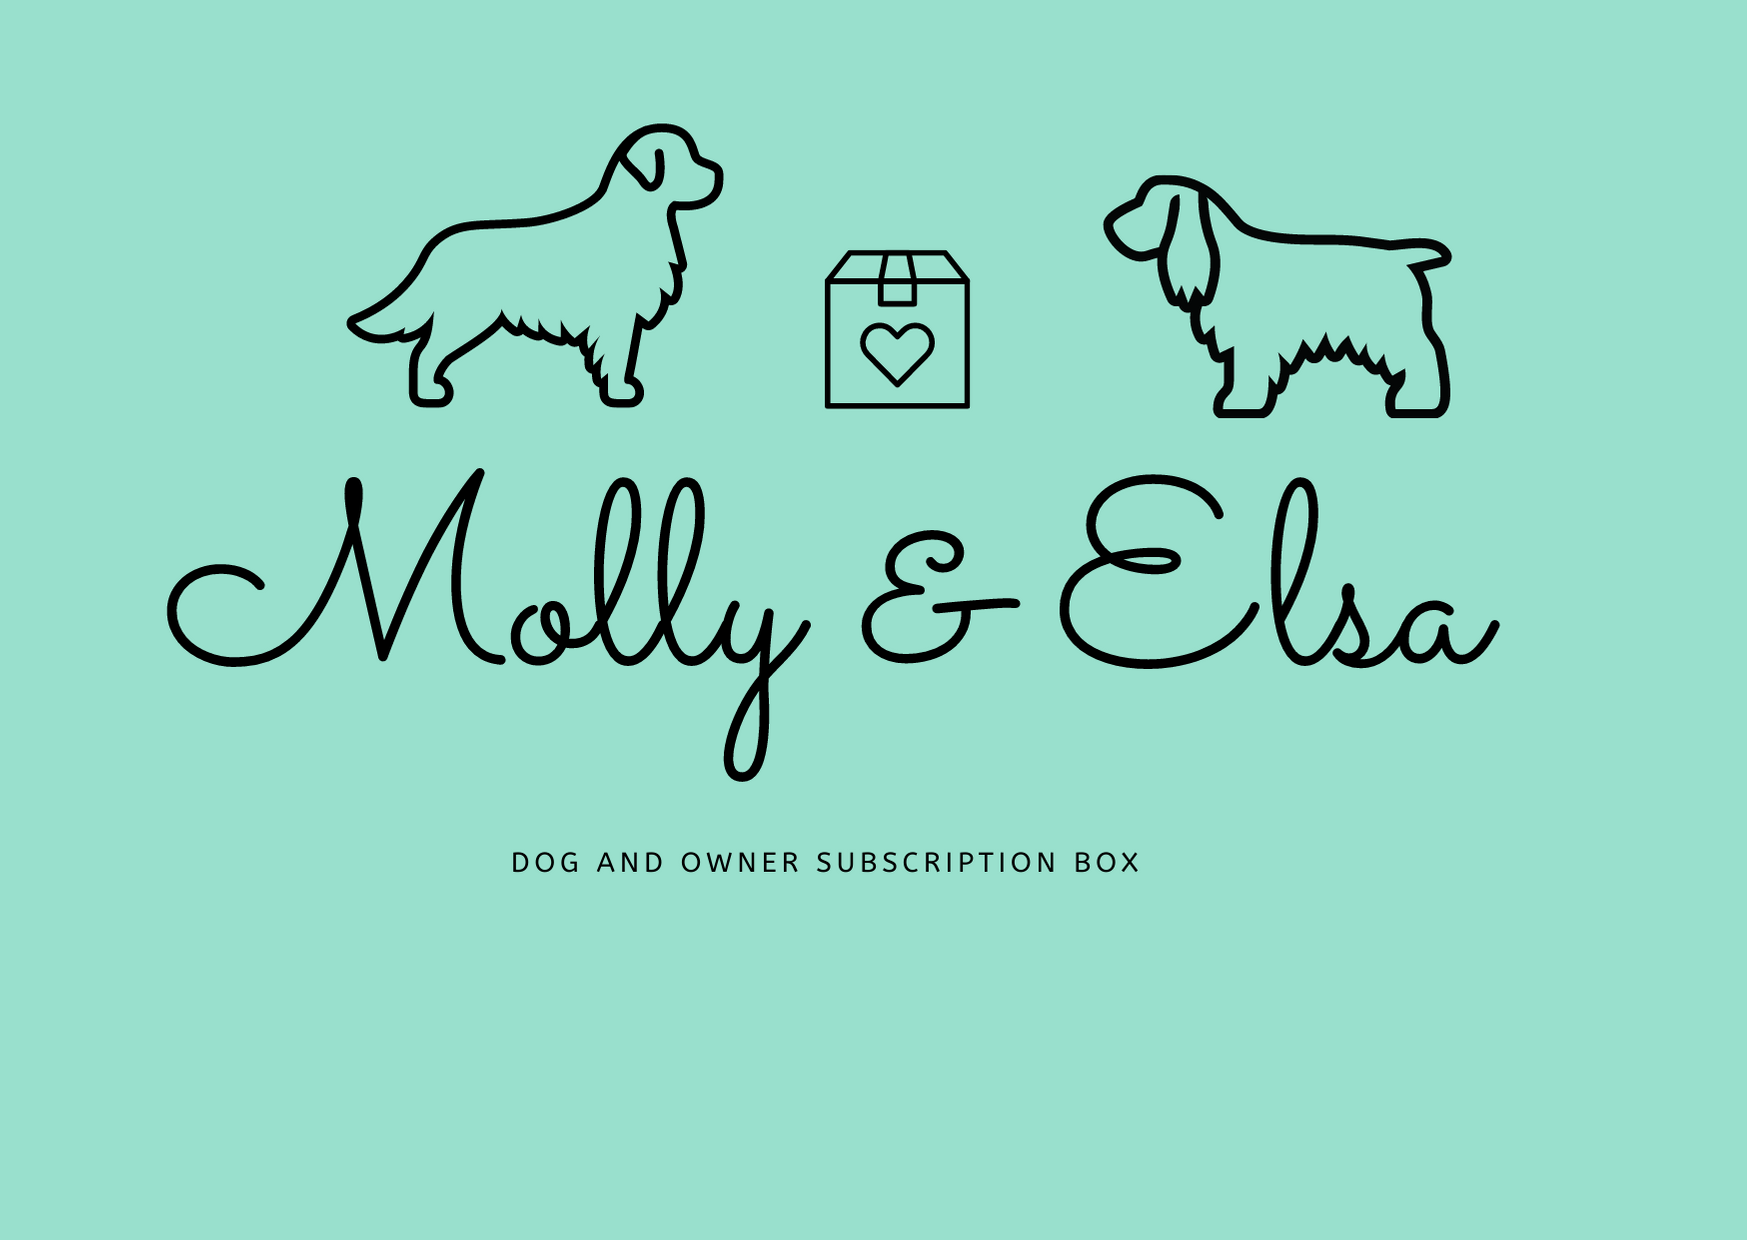 181-original-size-the-dog-and-owner-subscription-box-5-2.png